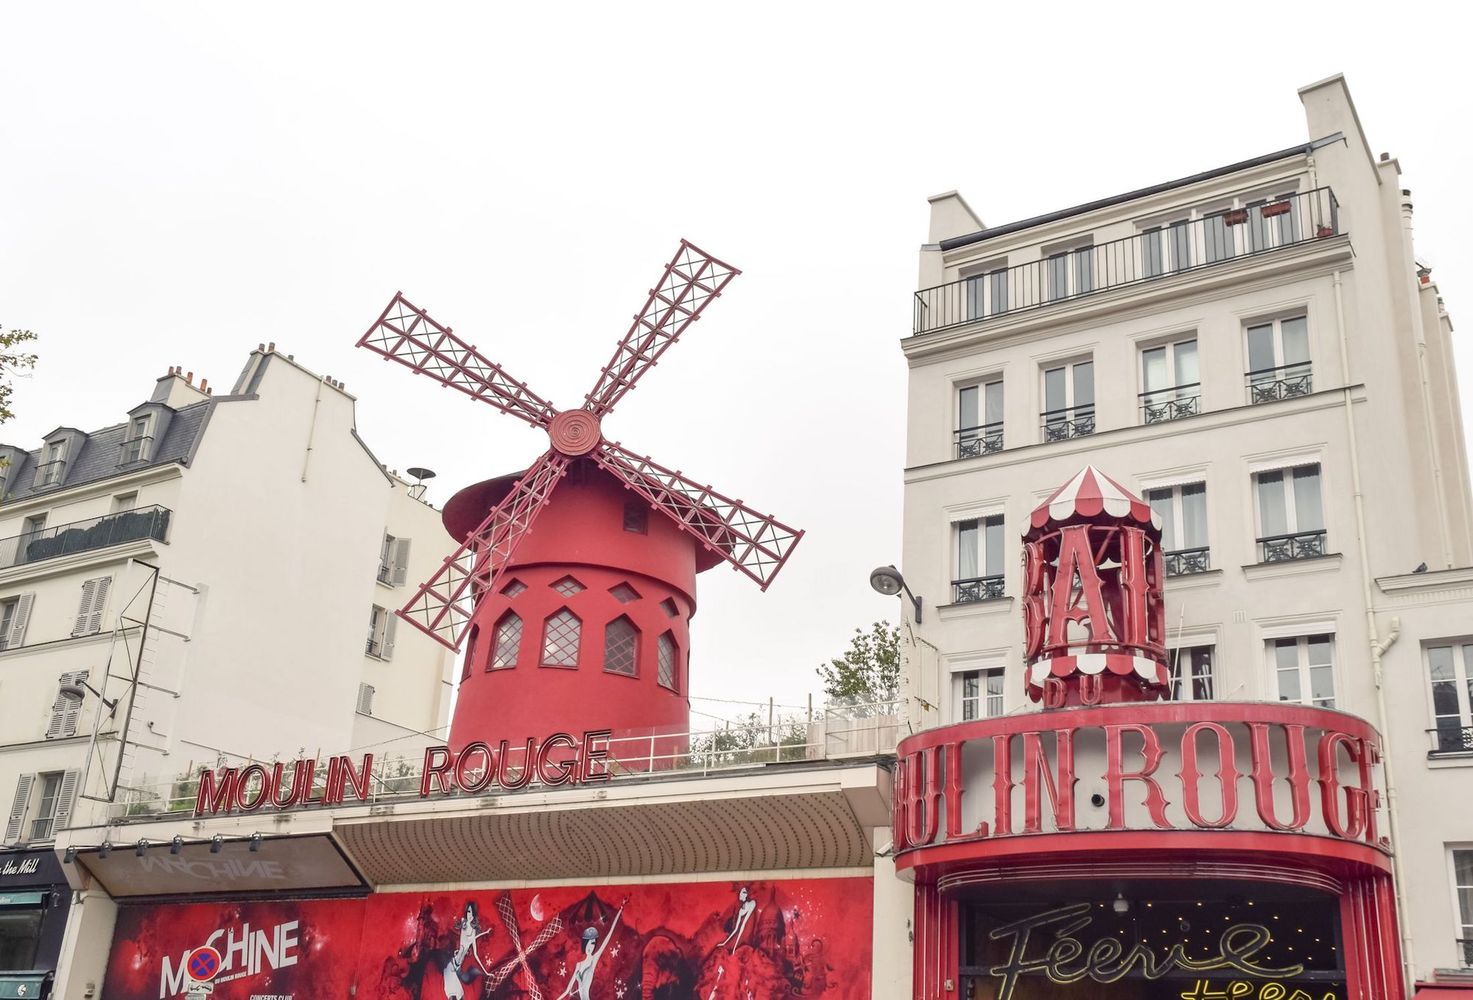 Things to do in Montmartre - Moulin Rouge, Paris